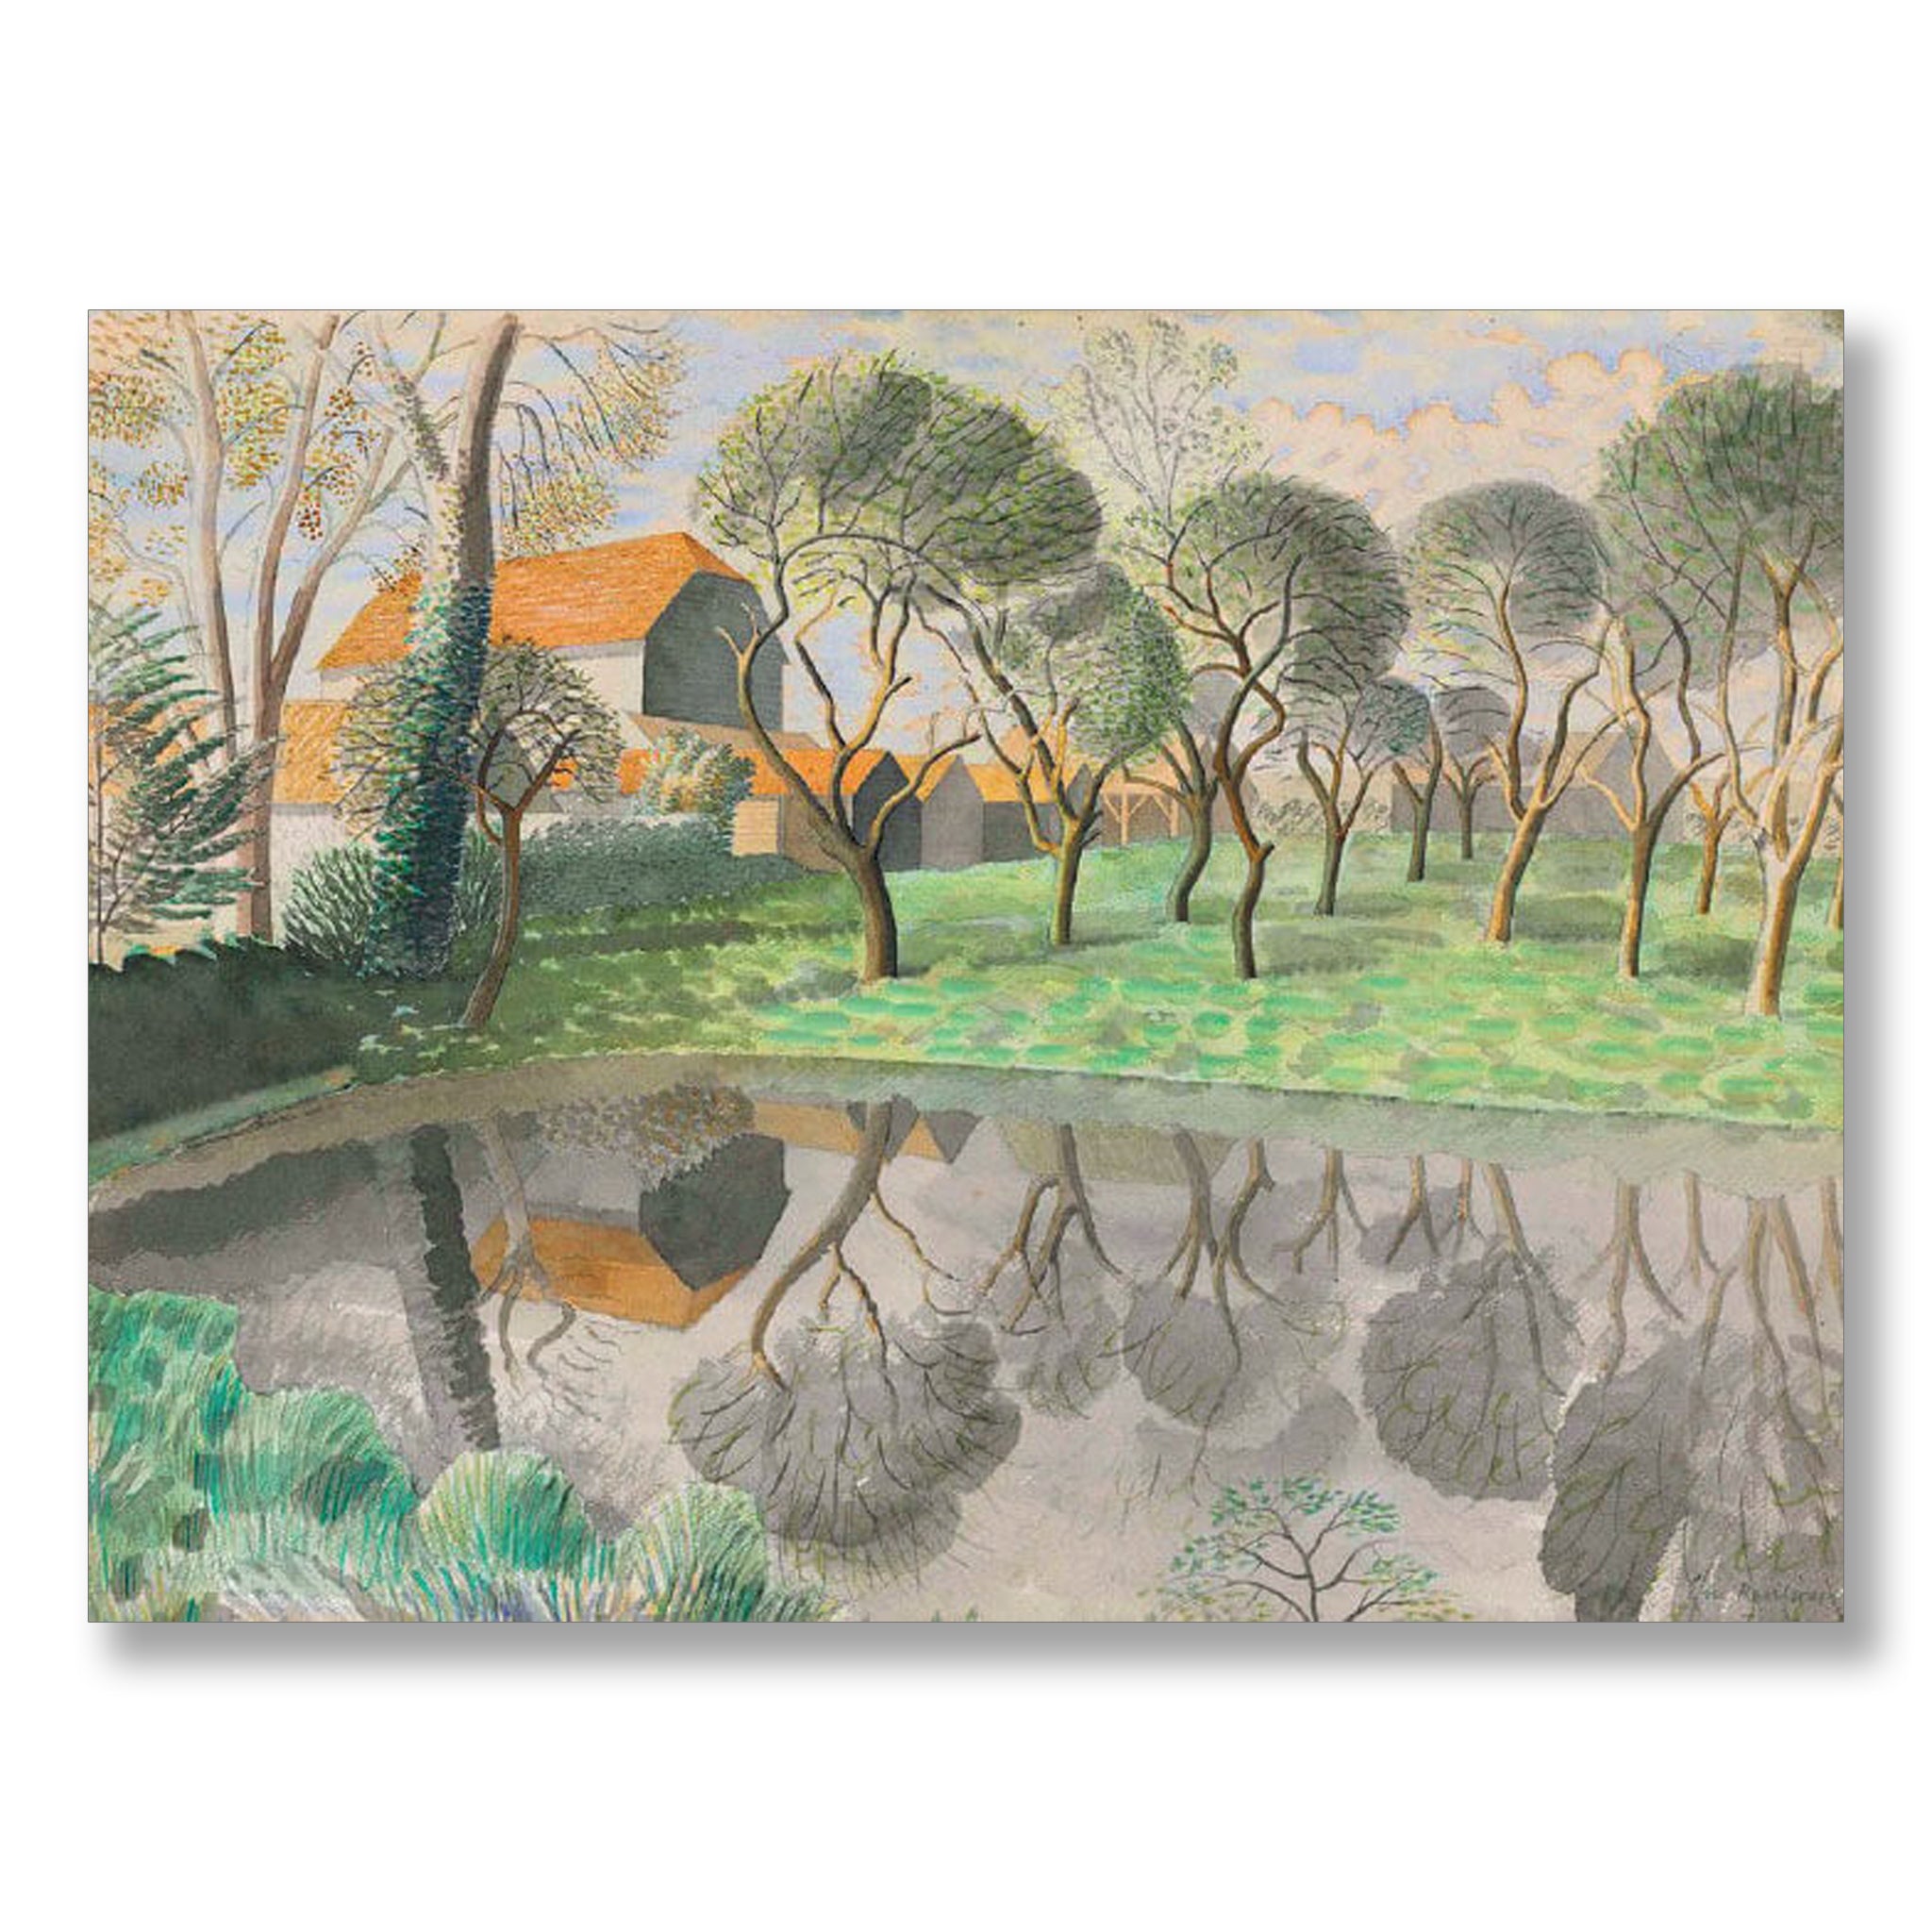 Newt Pond 1932 by Eric Ravilious